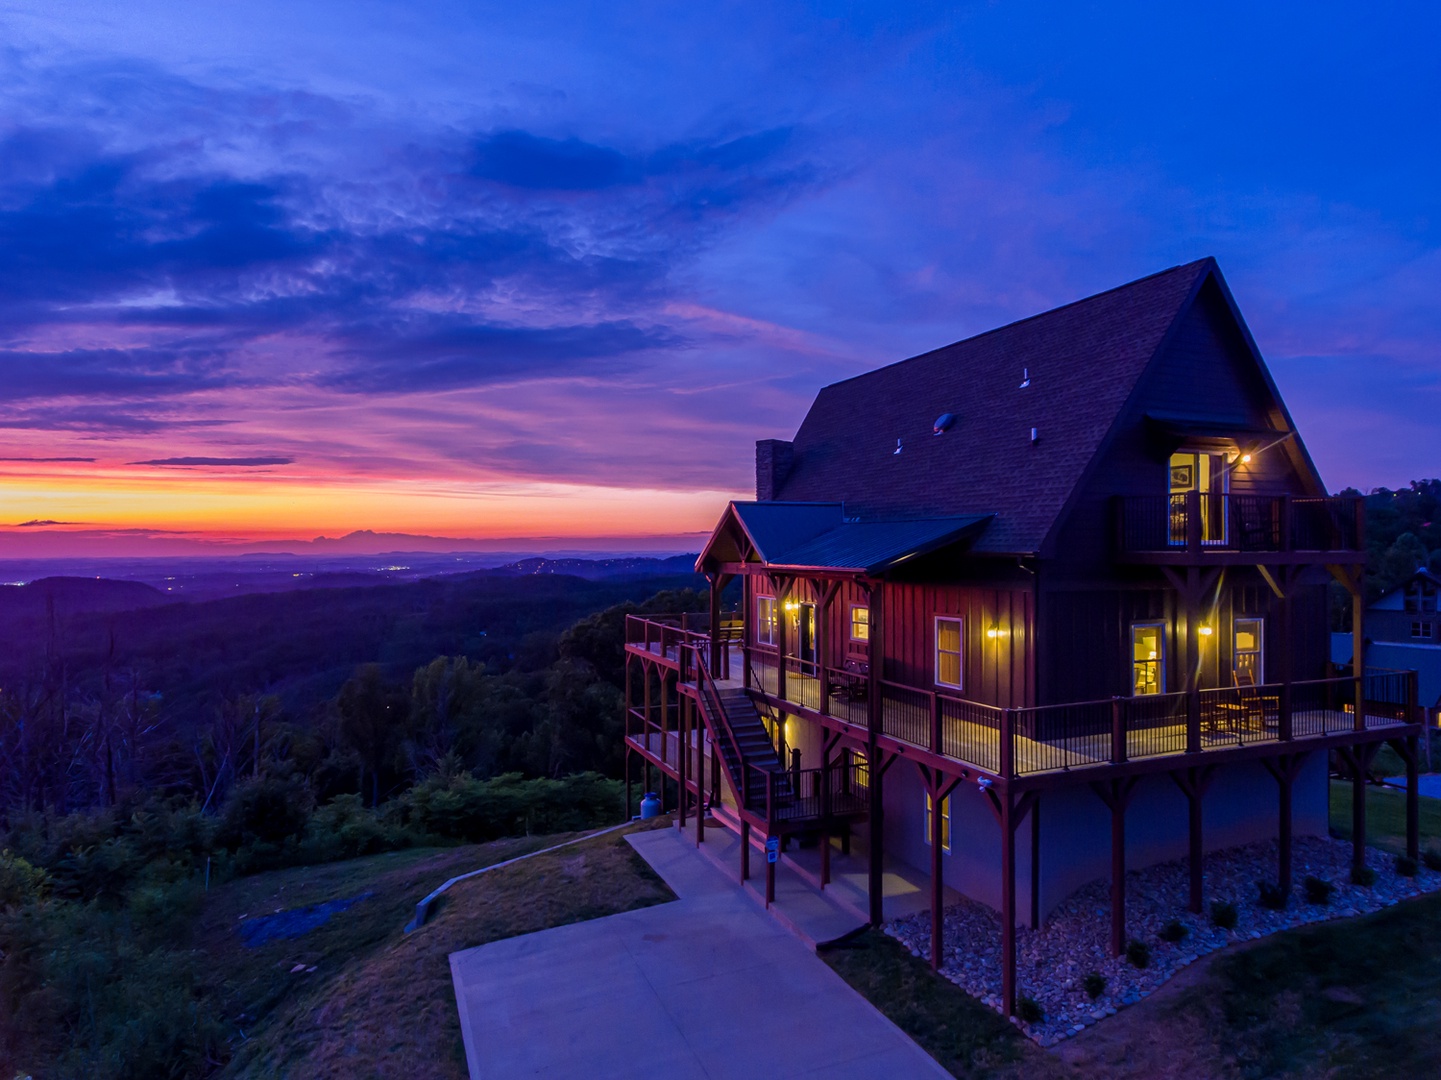 Sunset at The Best View Lodge, a 5 bedroom cabin rental located in gatlinburg